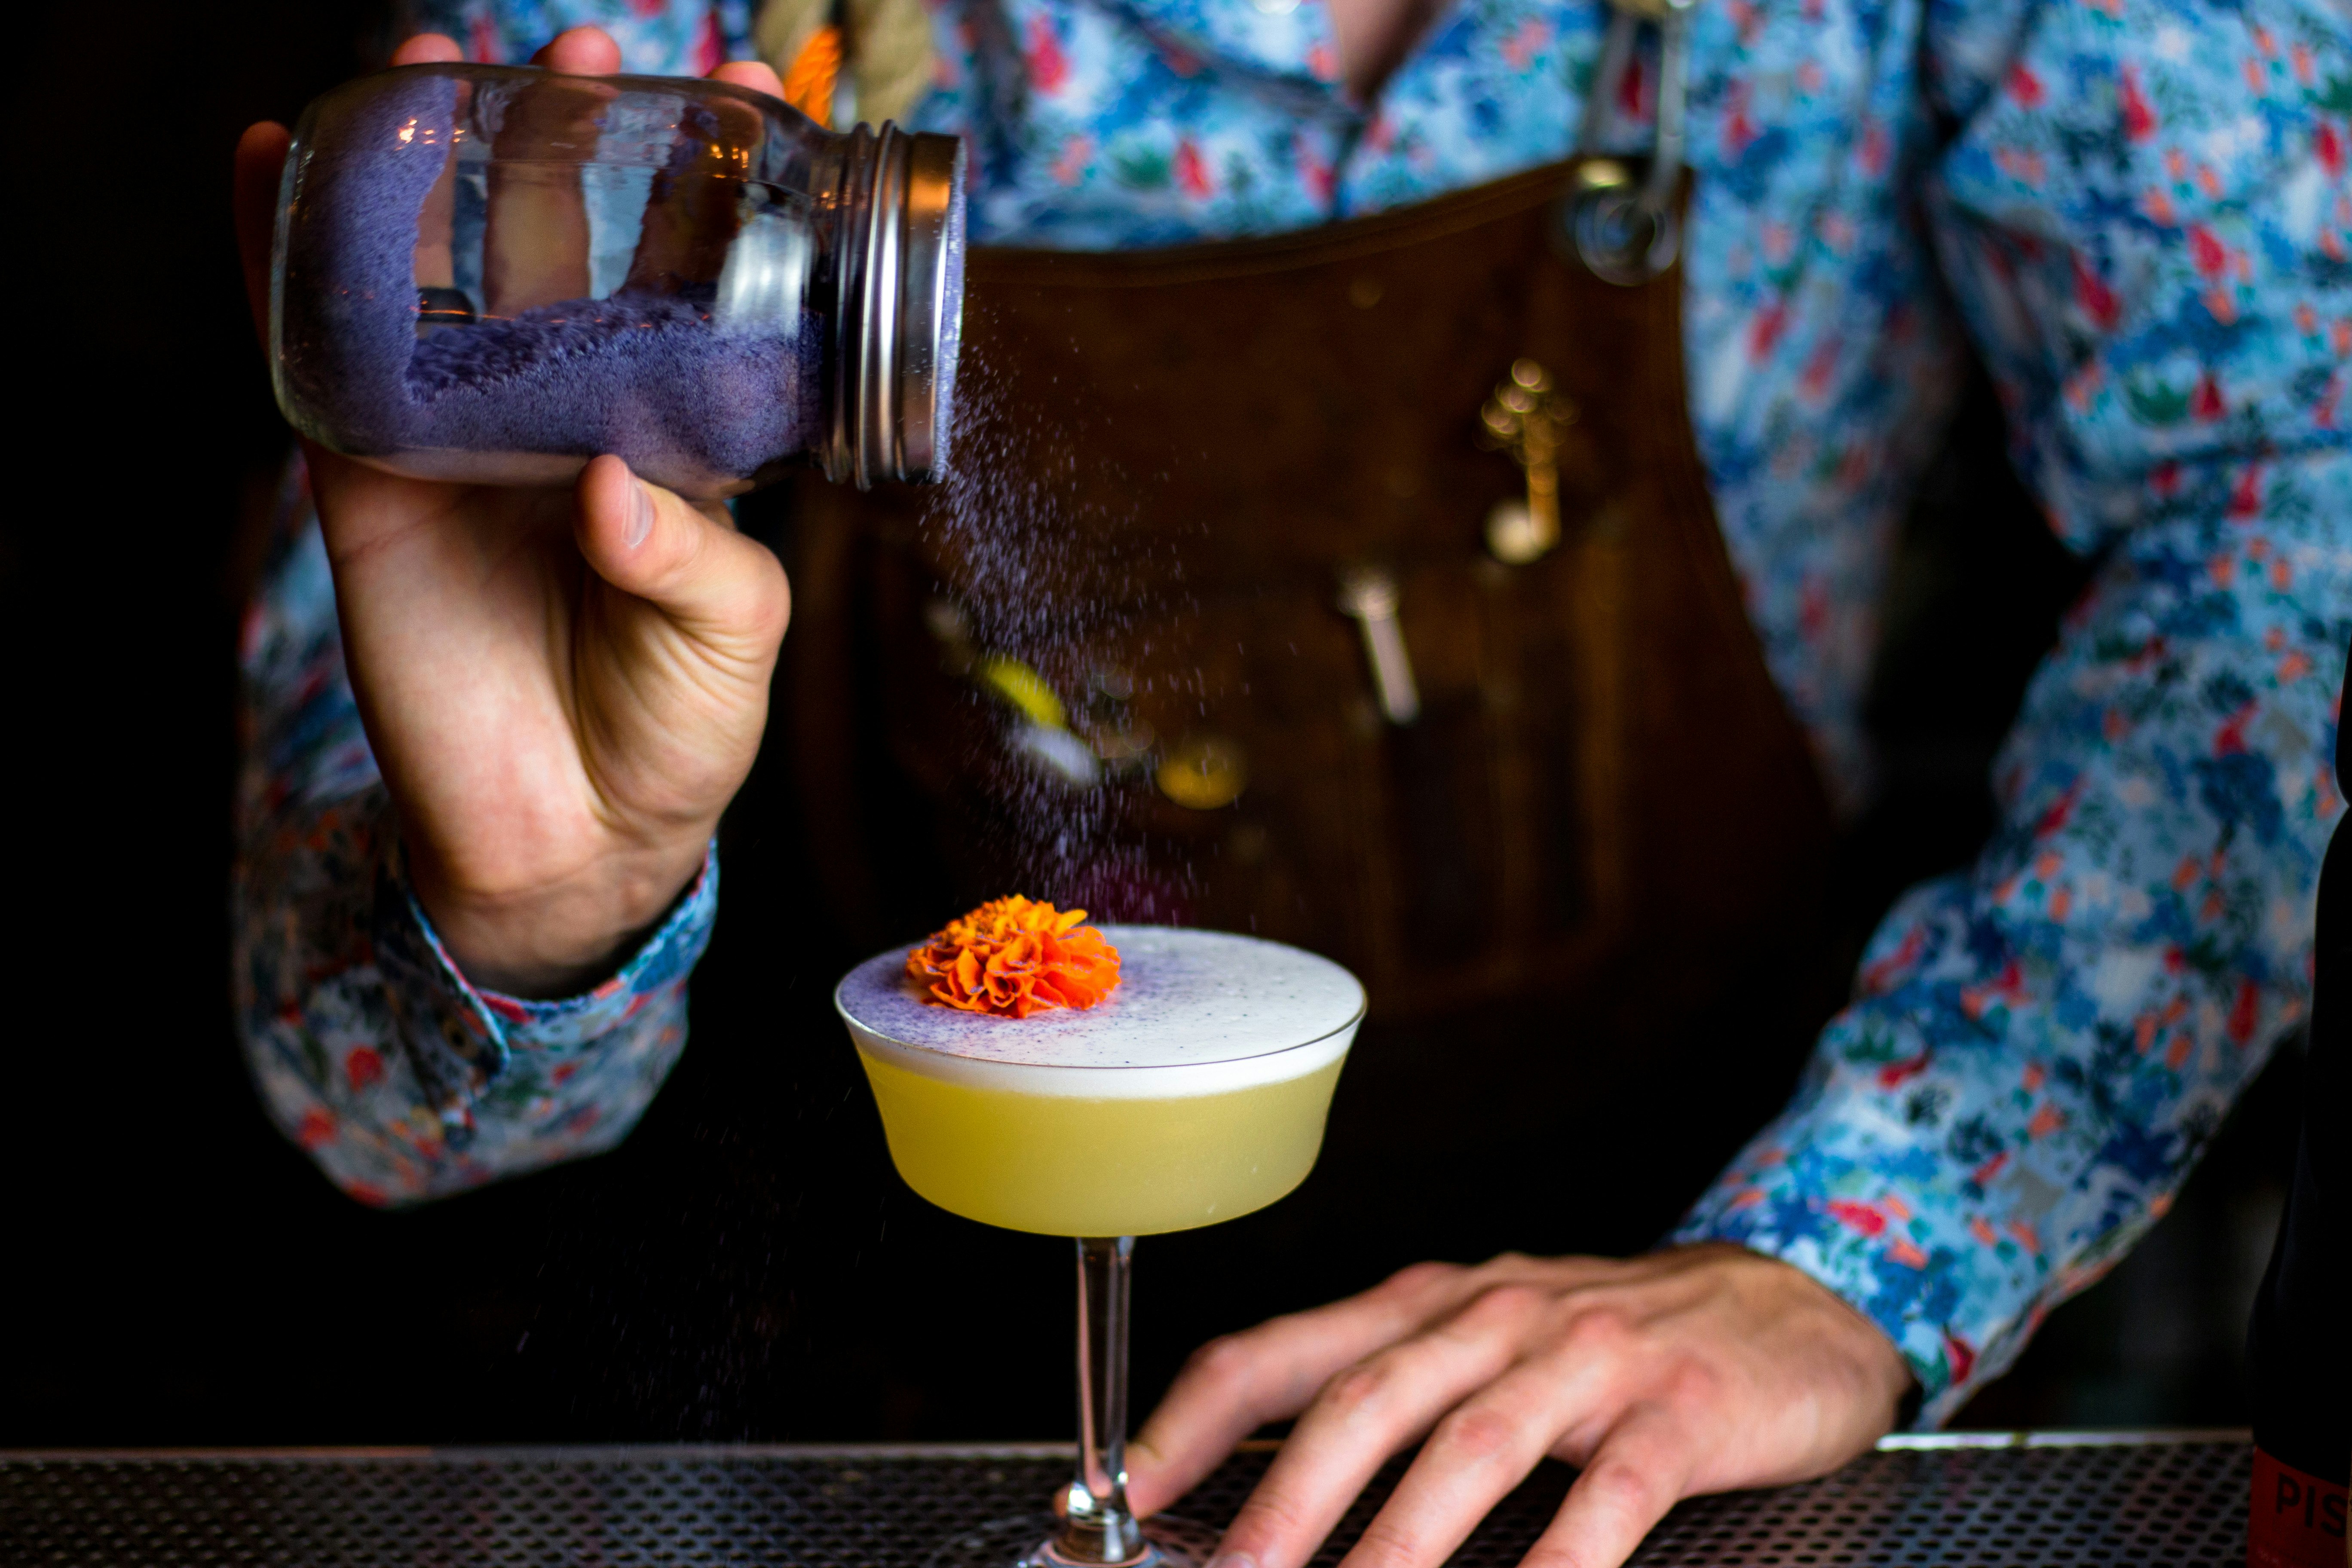 A bartender sprinkles purple garnish powder on the top of a frothy cocktail with an orange flower at the top